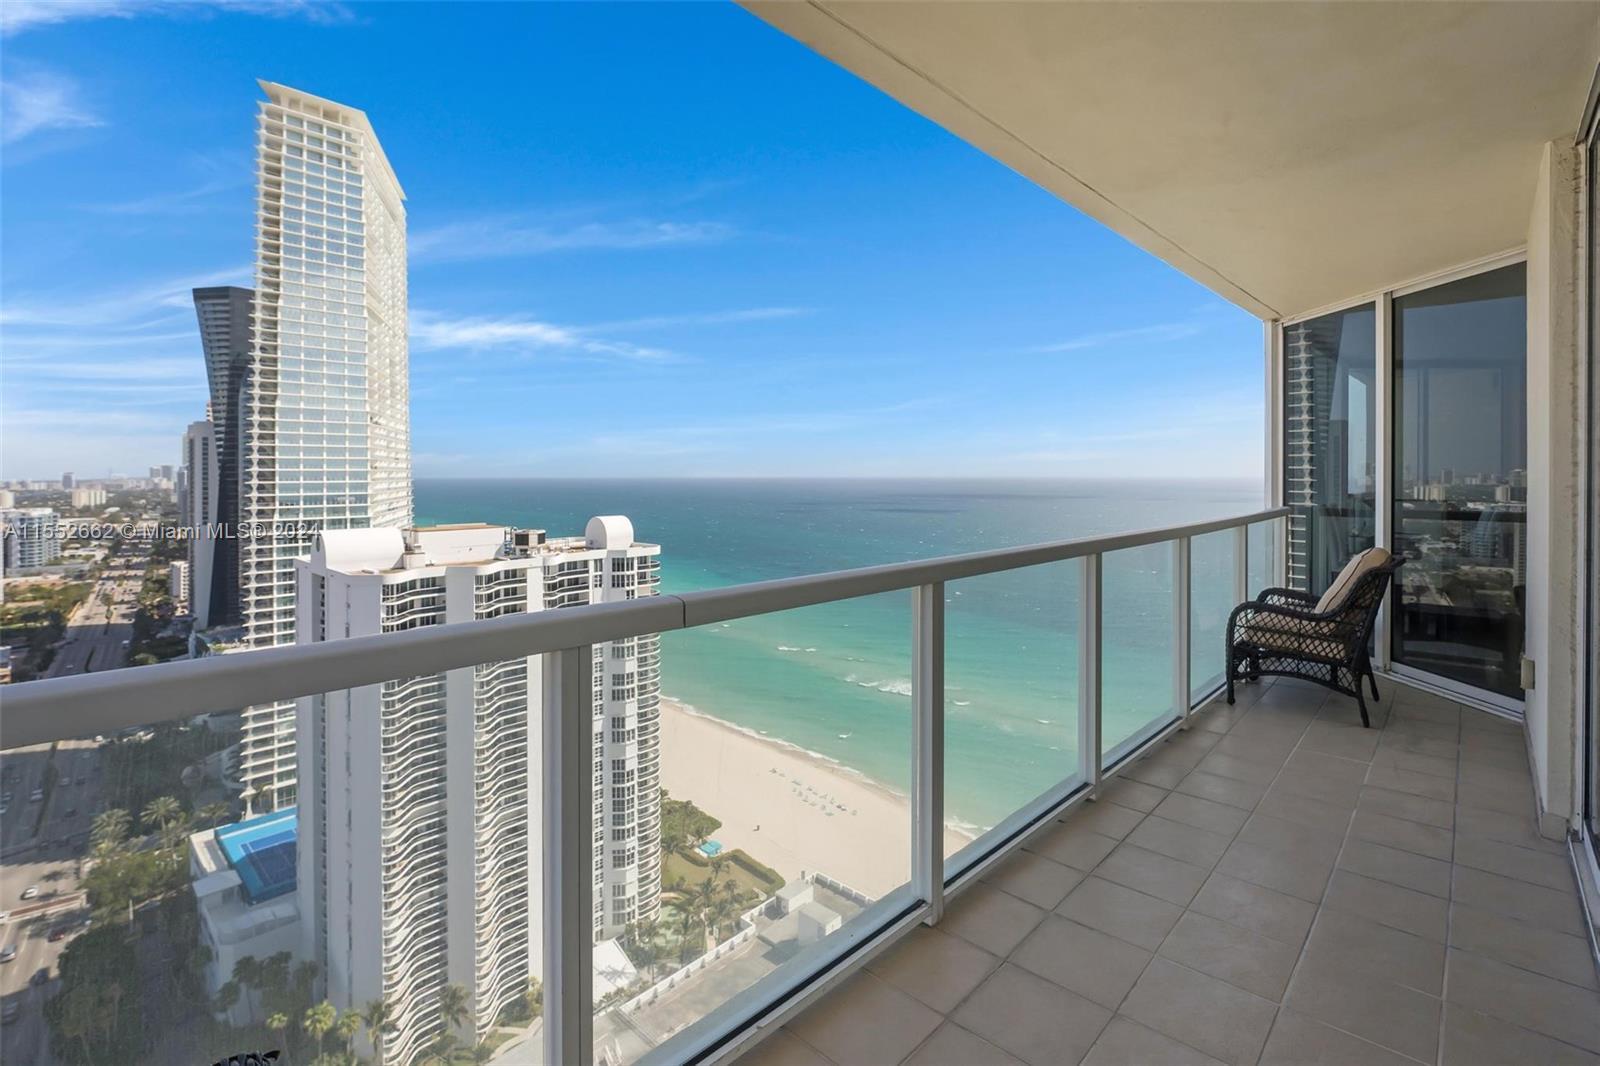 Photo of 16699 Collins Ave #3407 in Sunny Isles Beach, FL